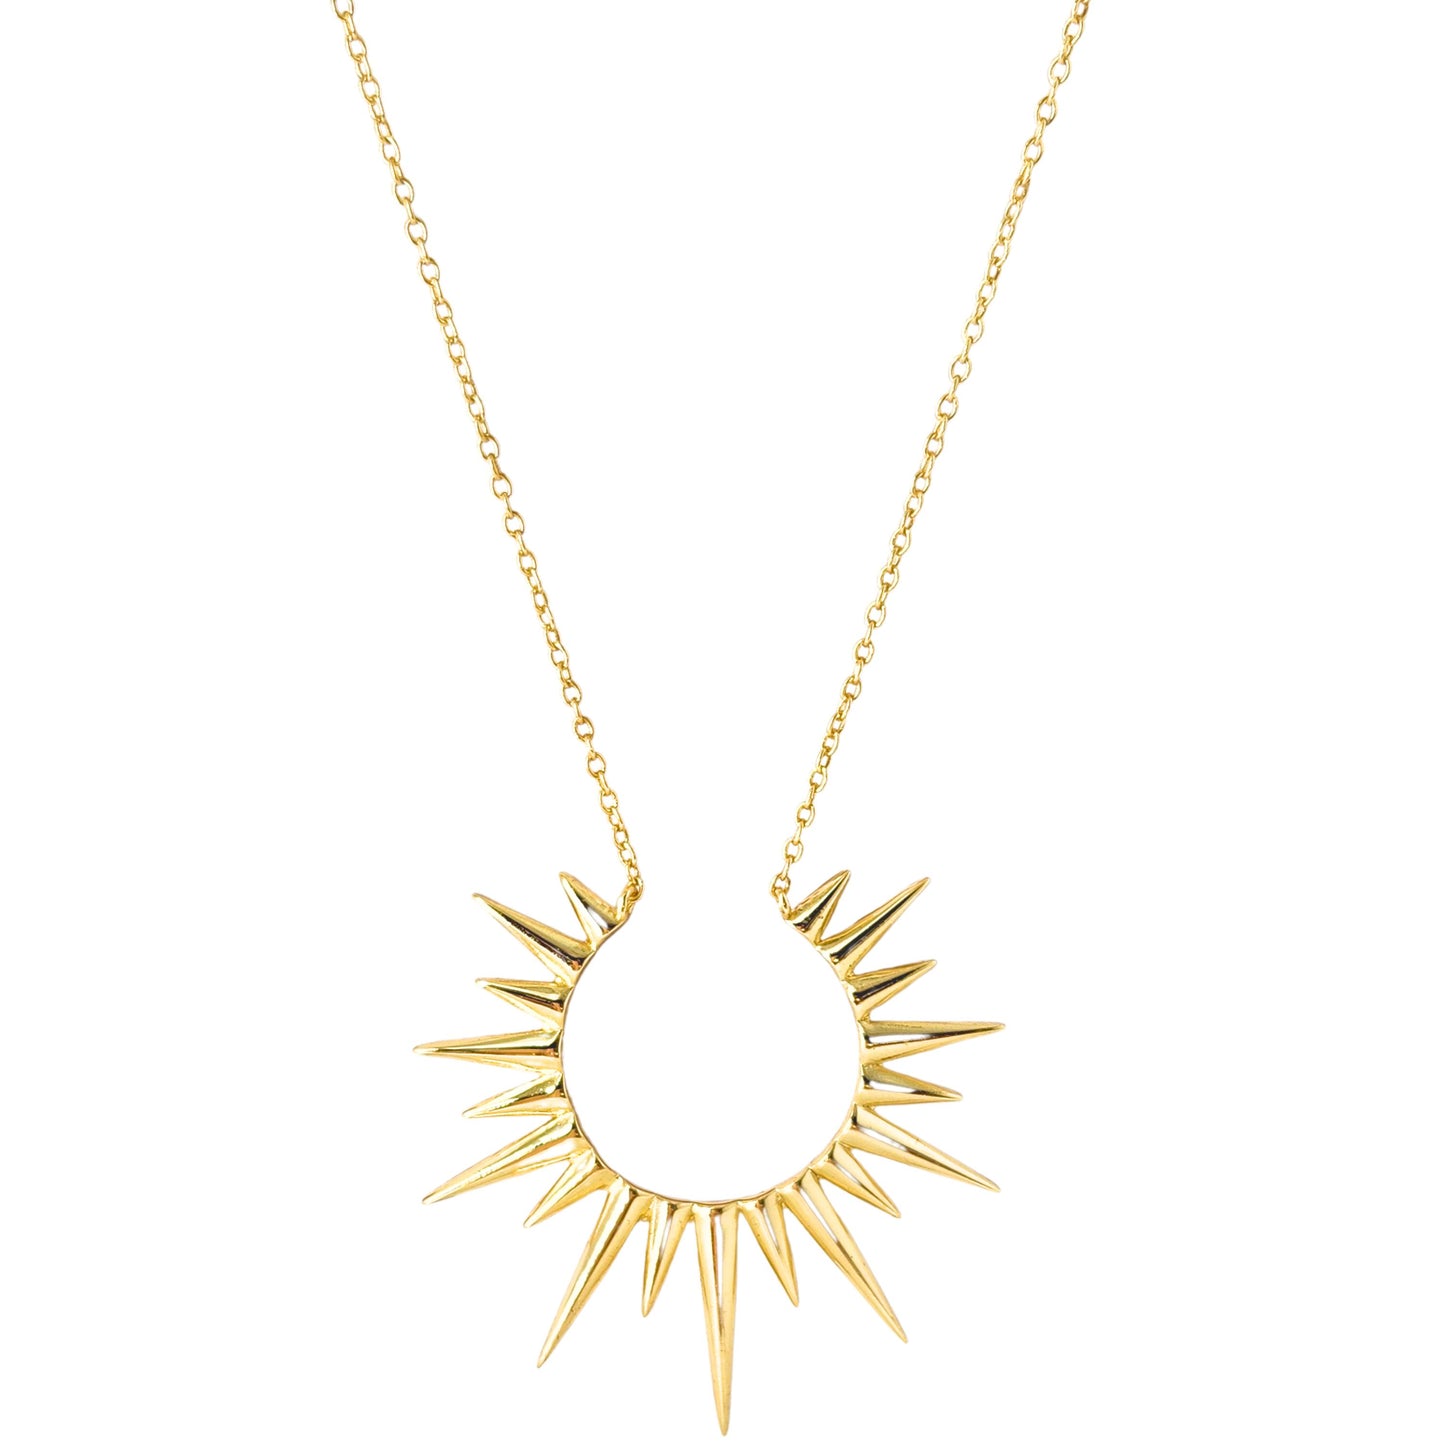 a gold necklace with spikes hanging from it